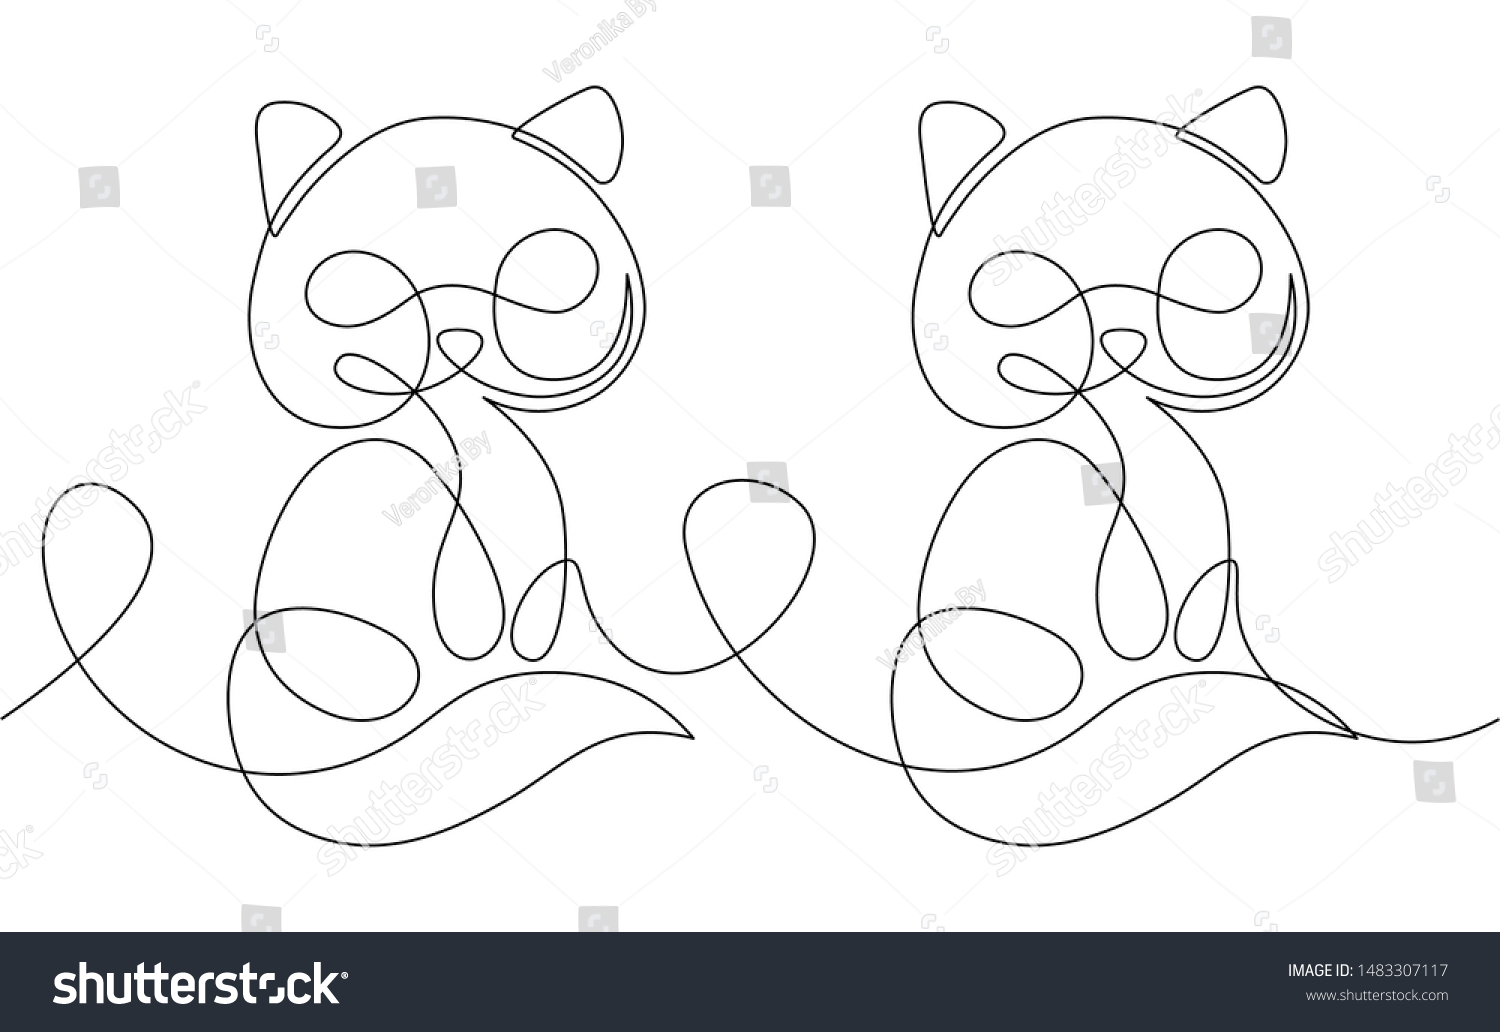 SVG of Happy cats seamless one line continuous drawing for sewing, stitching, quilting. Cute textile craft pattern. svg